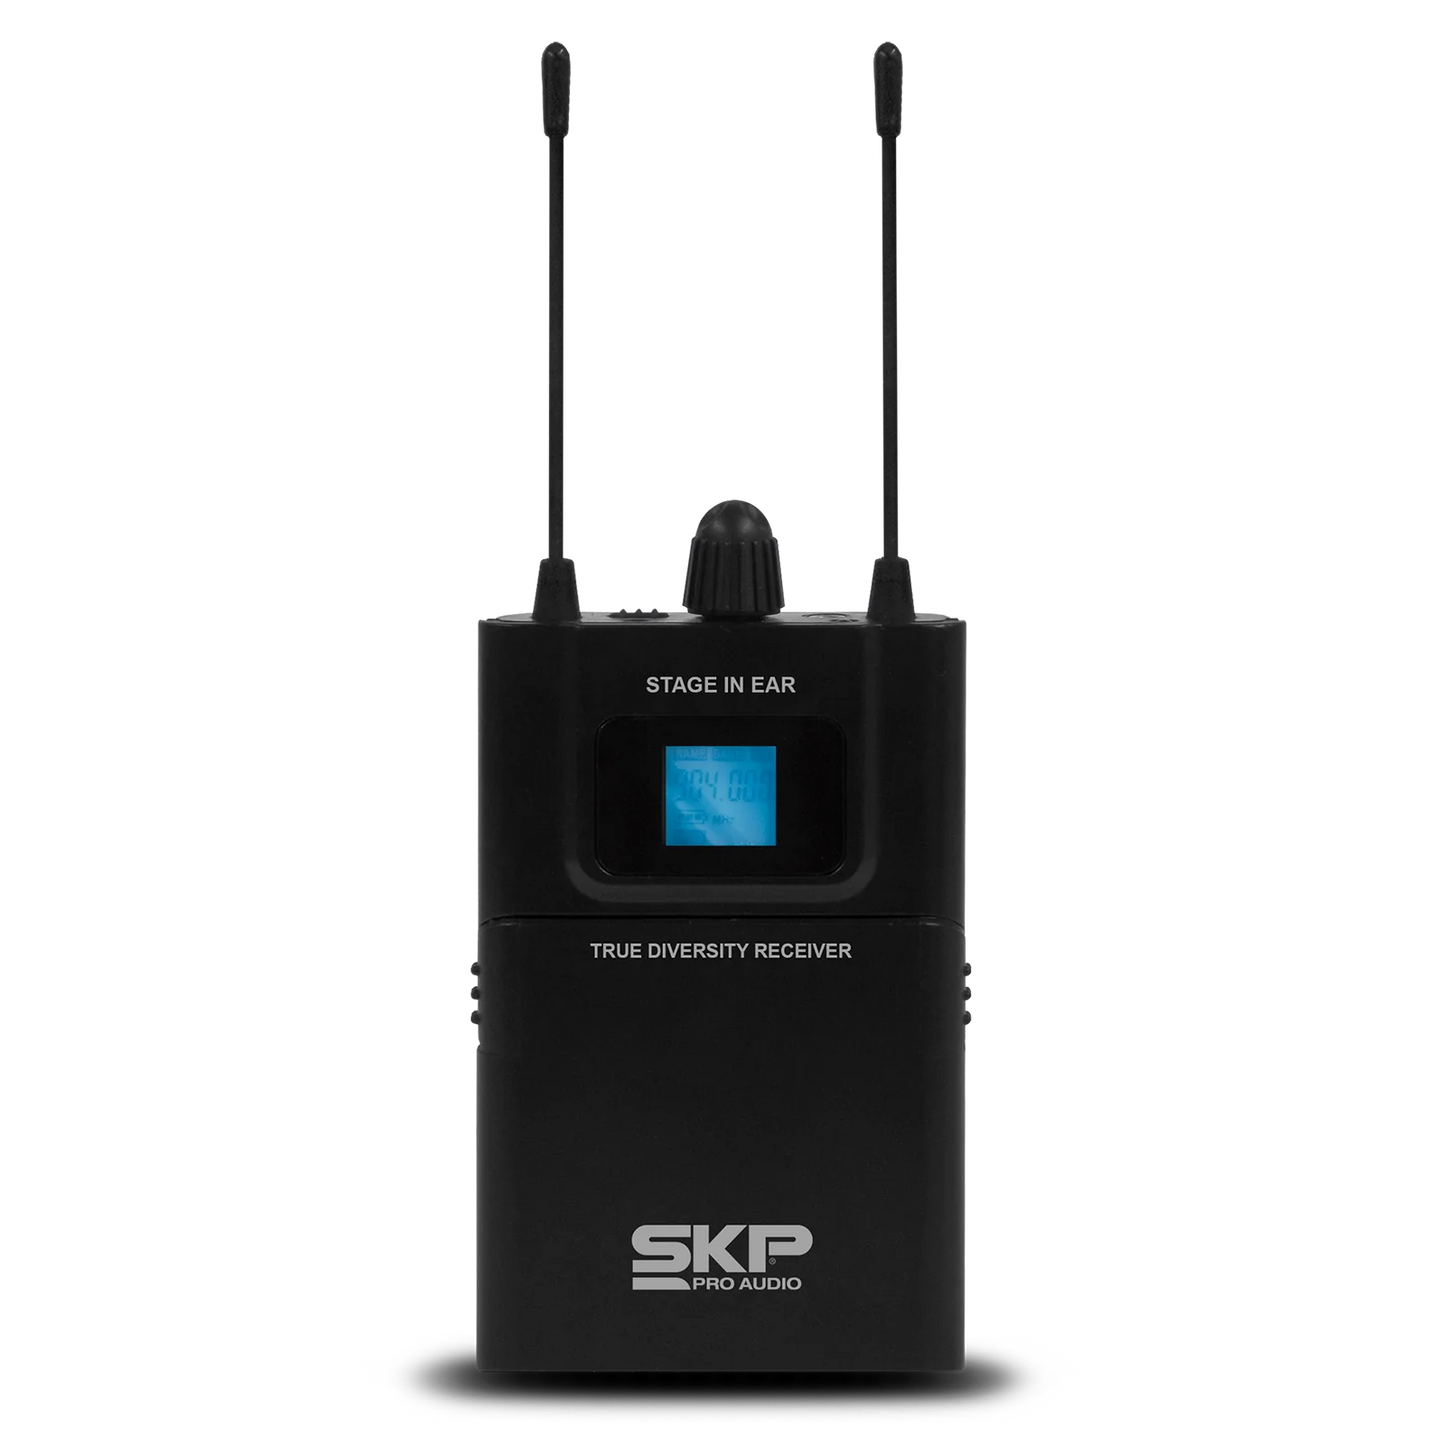 SKP PRO AUDIO STAGE IN EAR UHF Wireless Monitoring System - 4